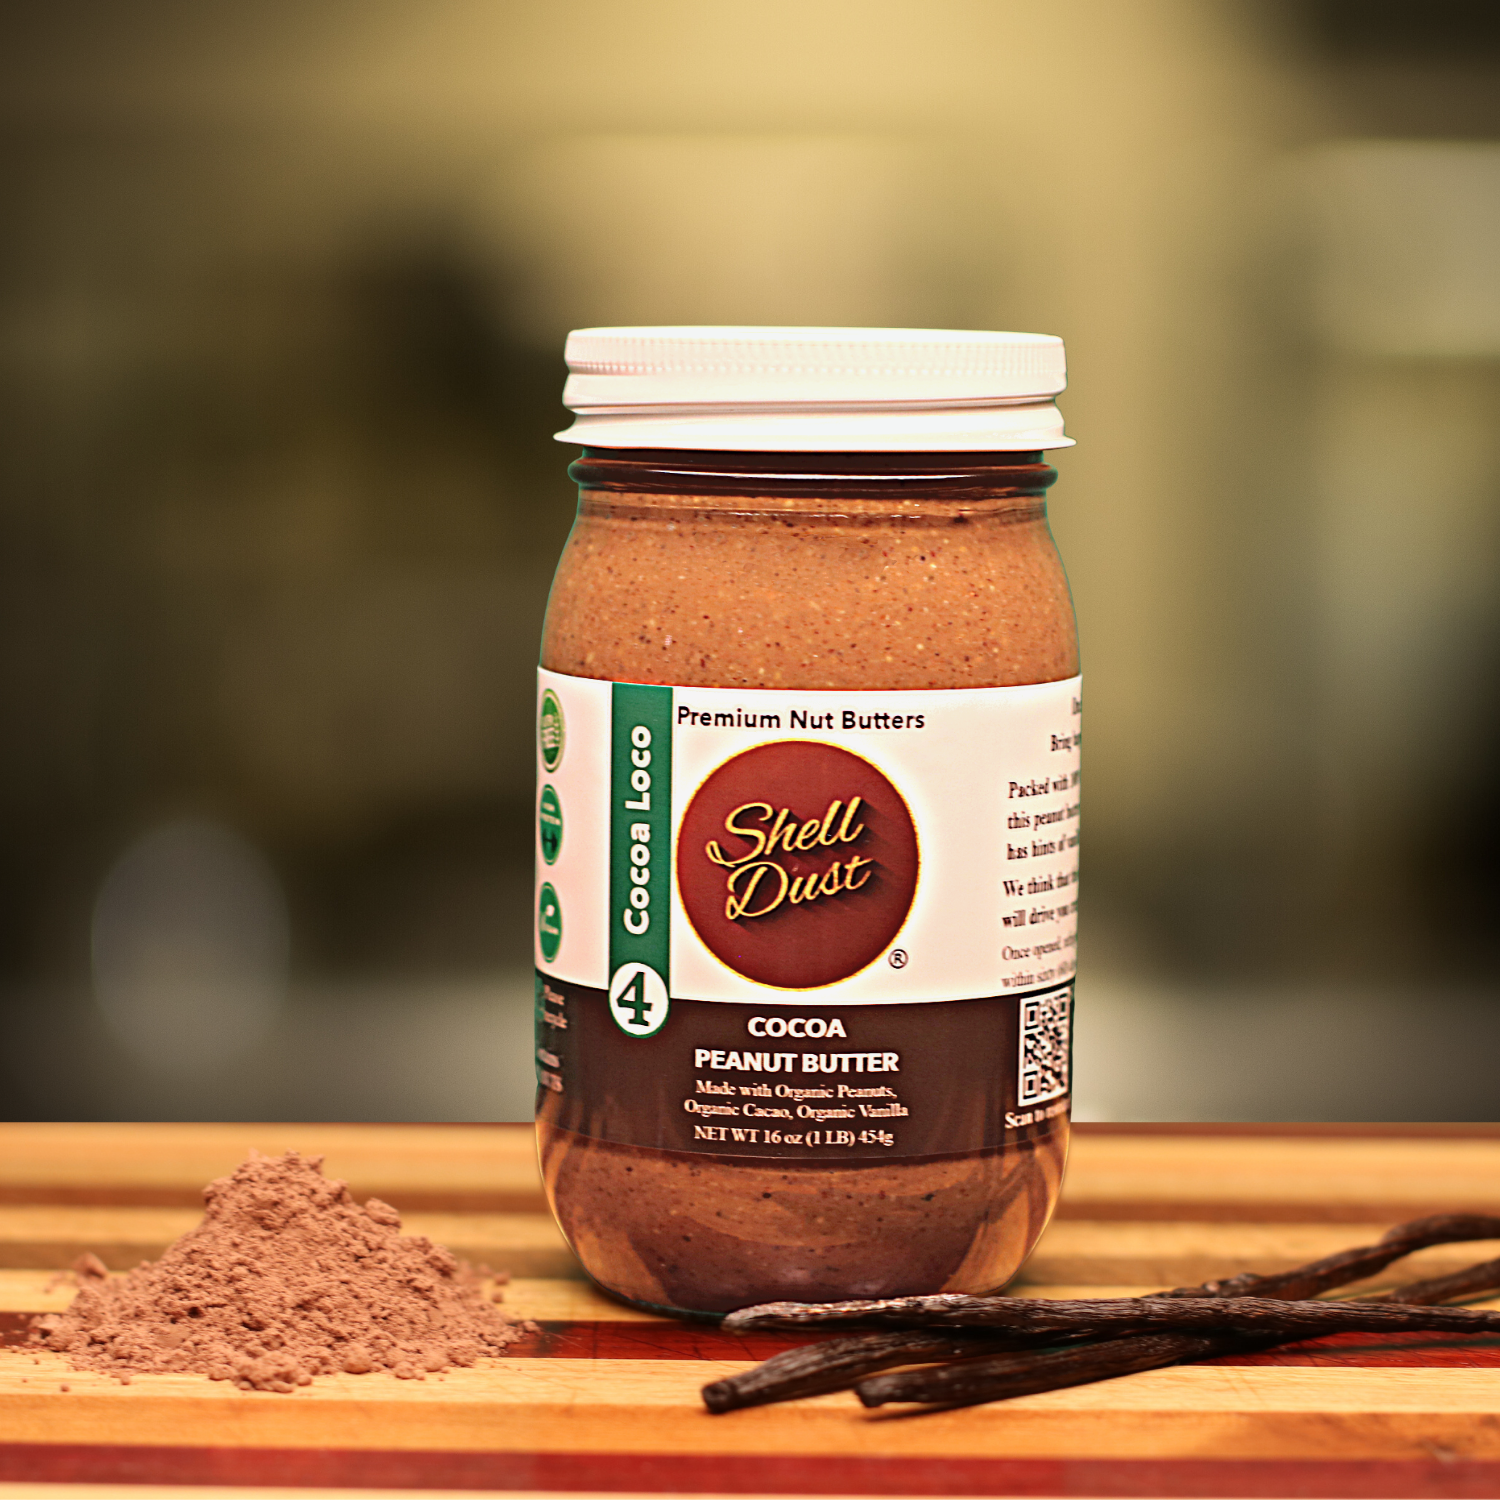 16oz - Chocolate Peanut Butter (with Organic Ingredients)